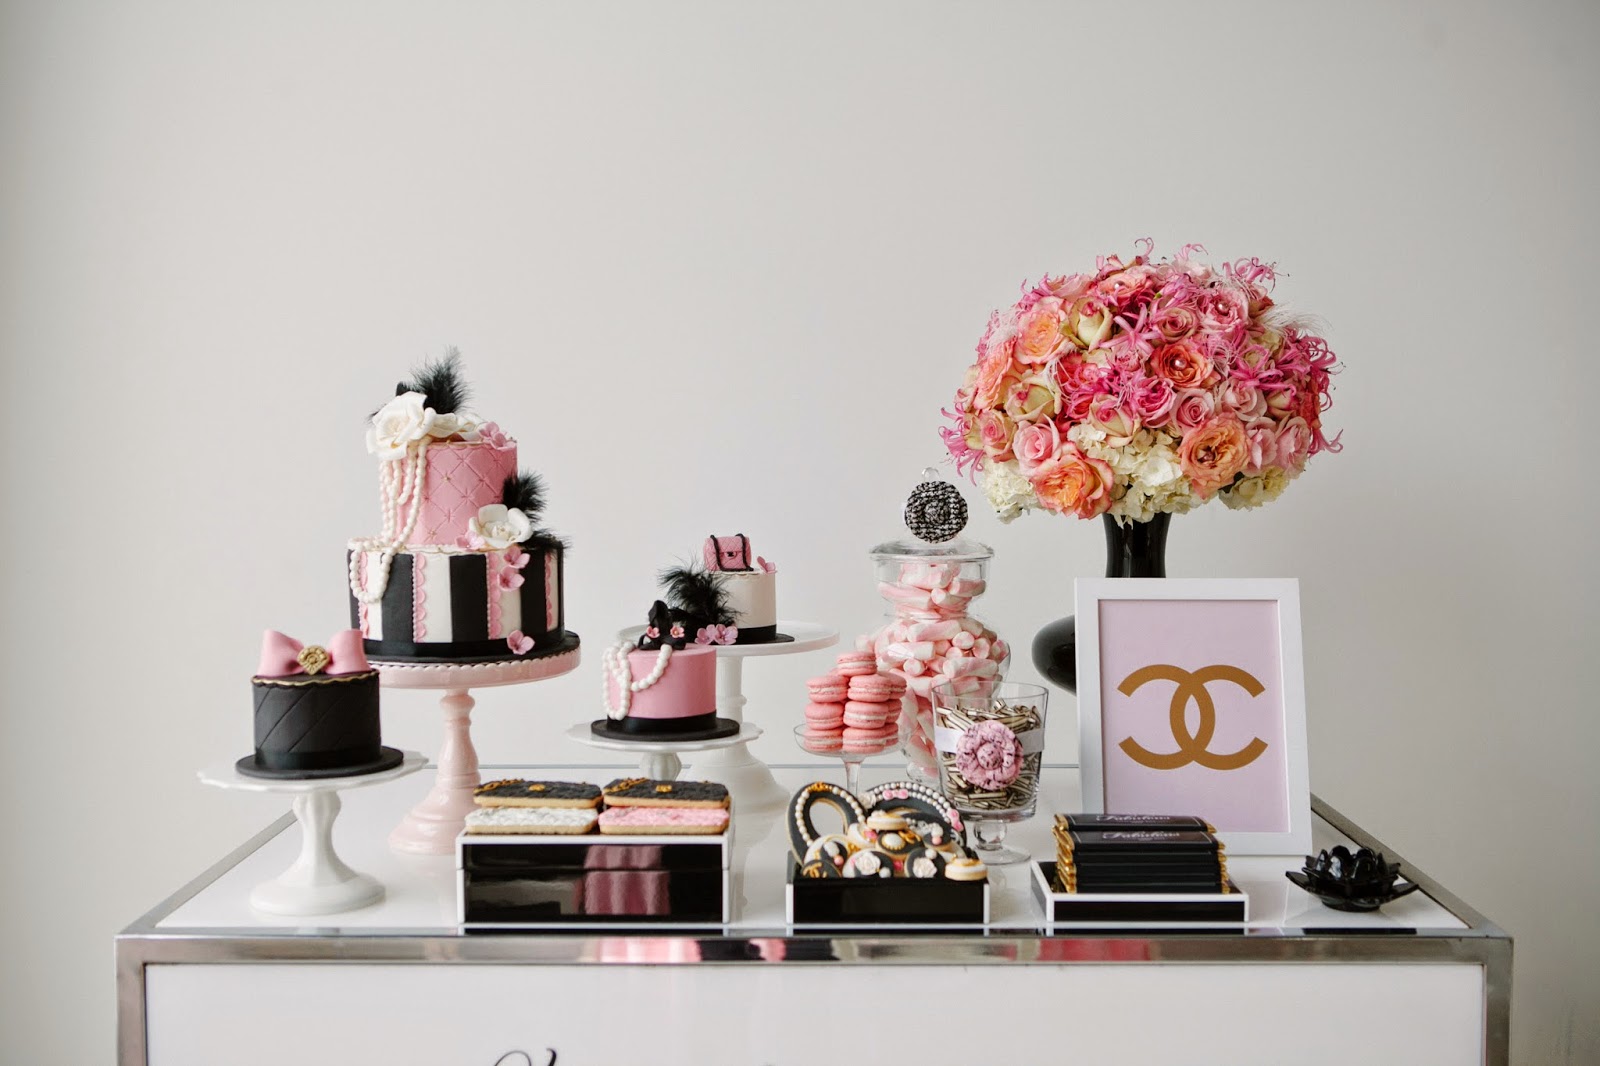 COCO Chanel Party Ideas - Birthday Party Ideas for Kids